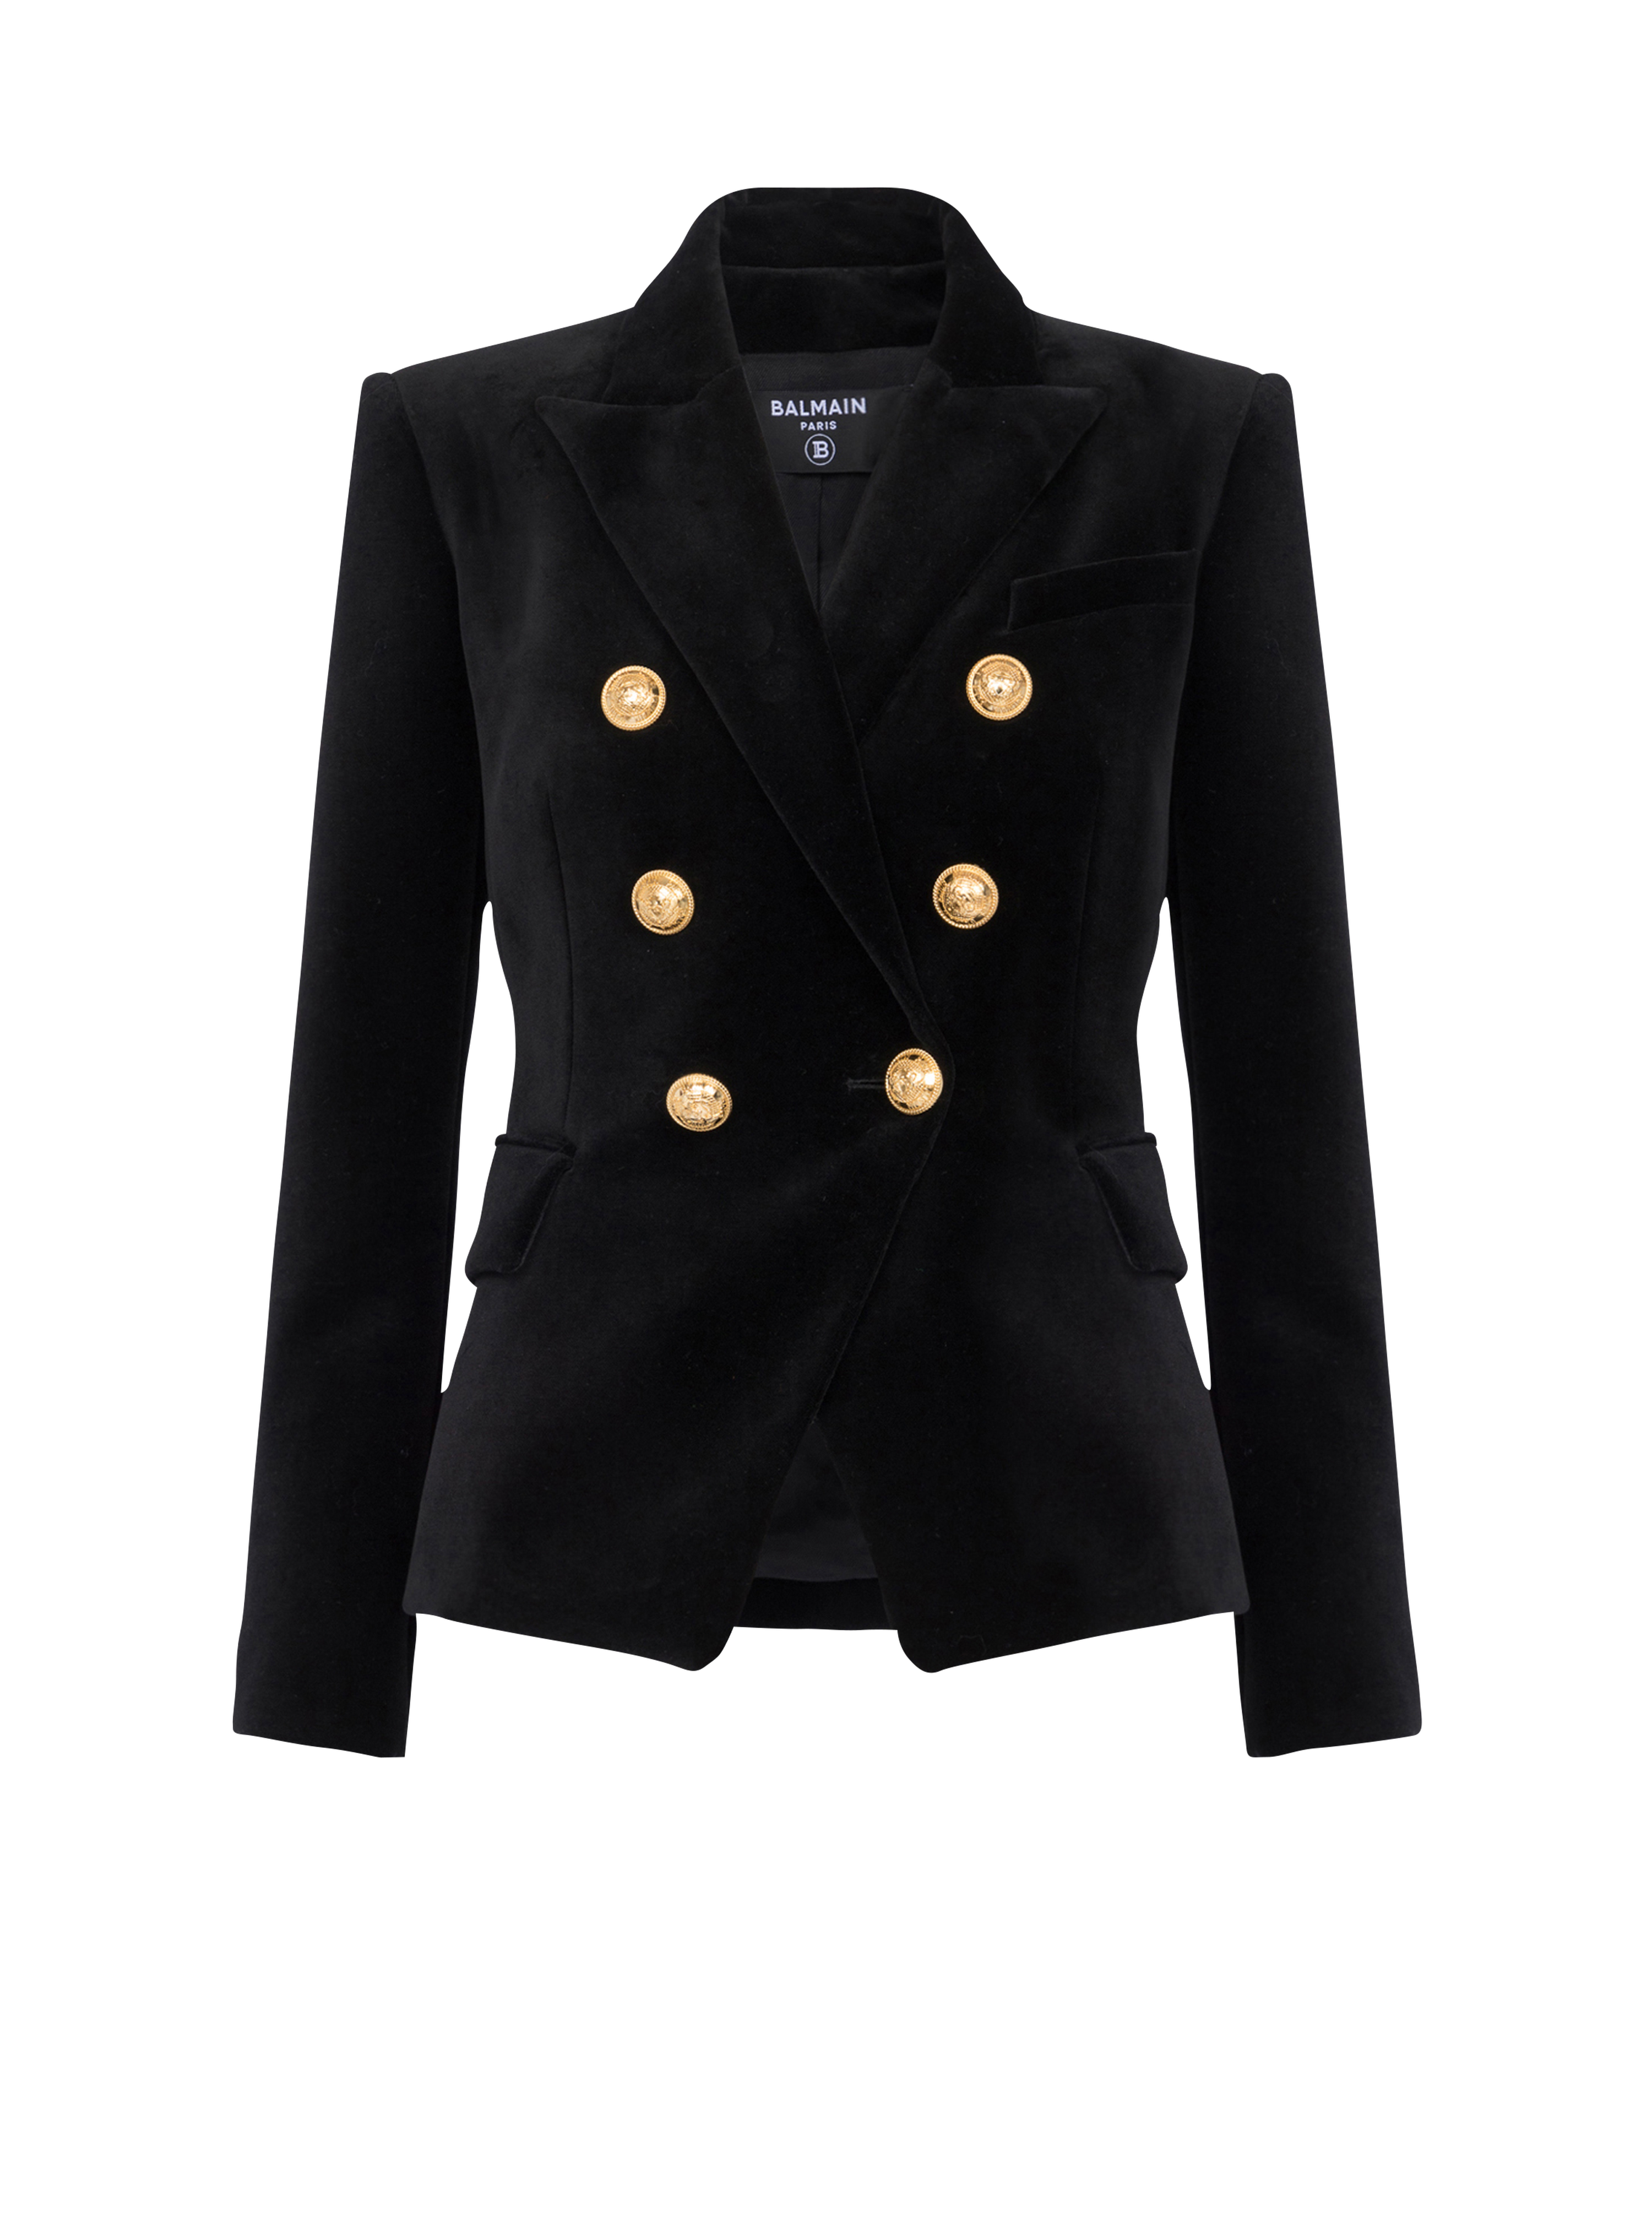 Velvet jacket with double-buttoned fastening, black